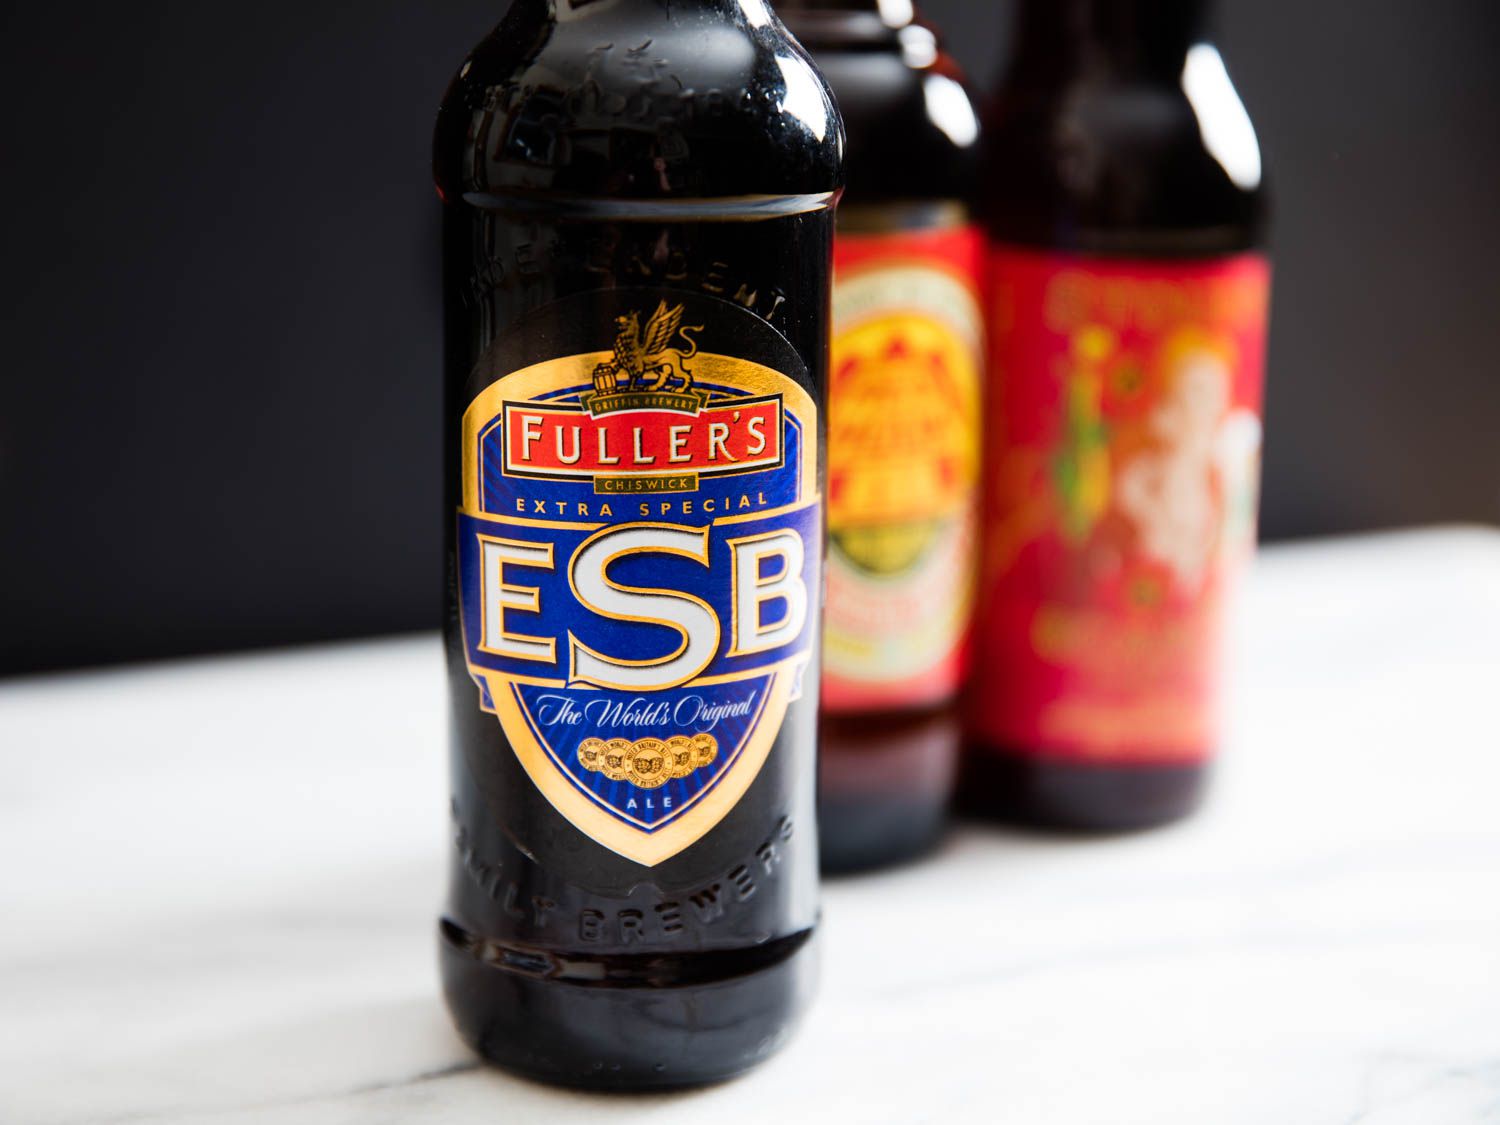 Fuller's Extra Special ESB 0,5l - Extra Special Bitter mit 5,9% Vol. aus England- Champion Ale